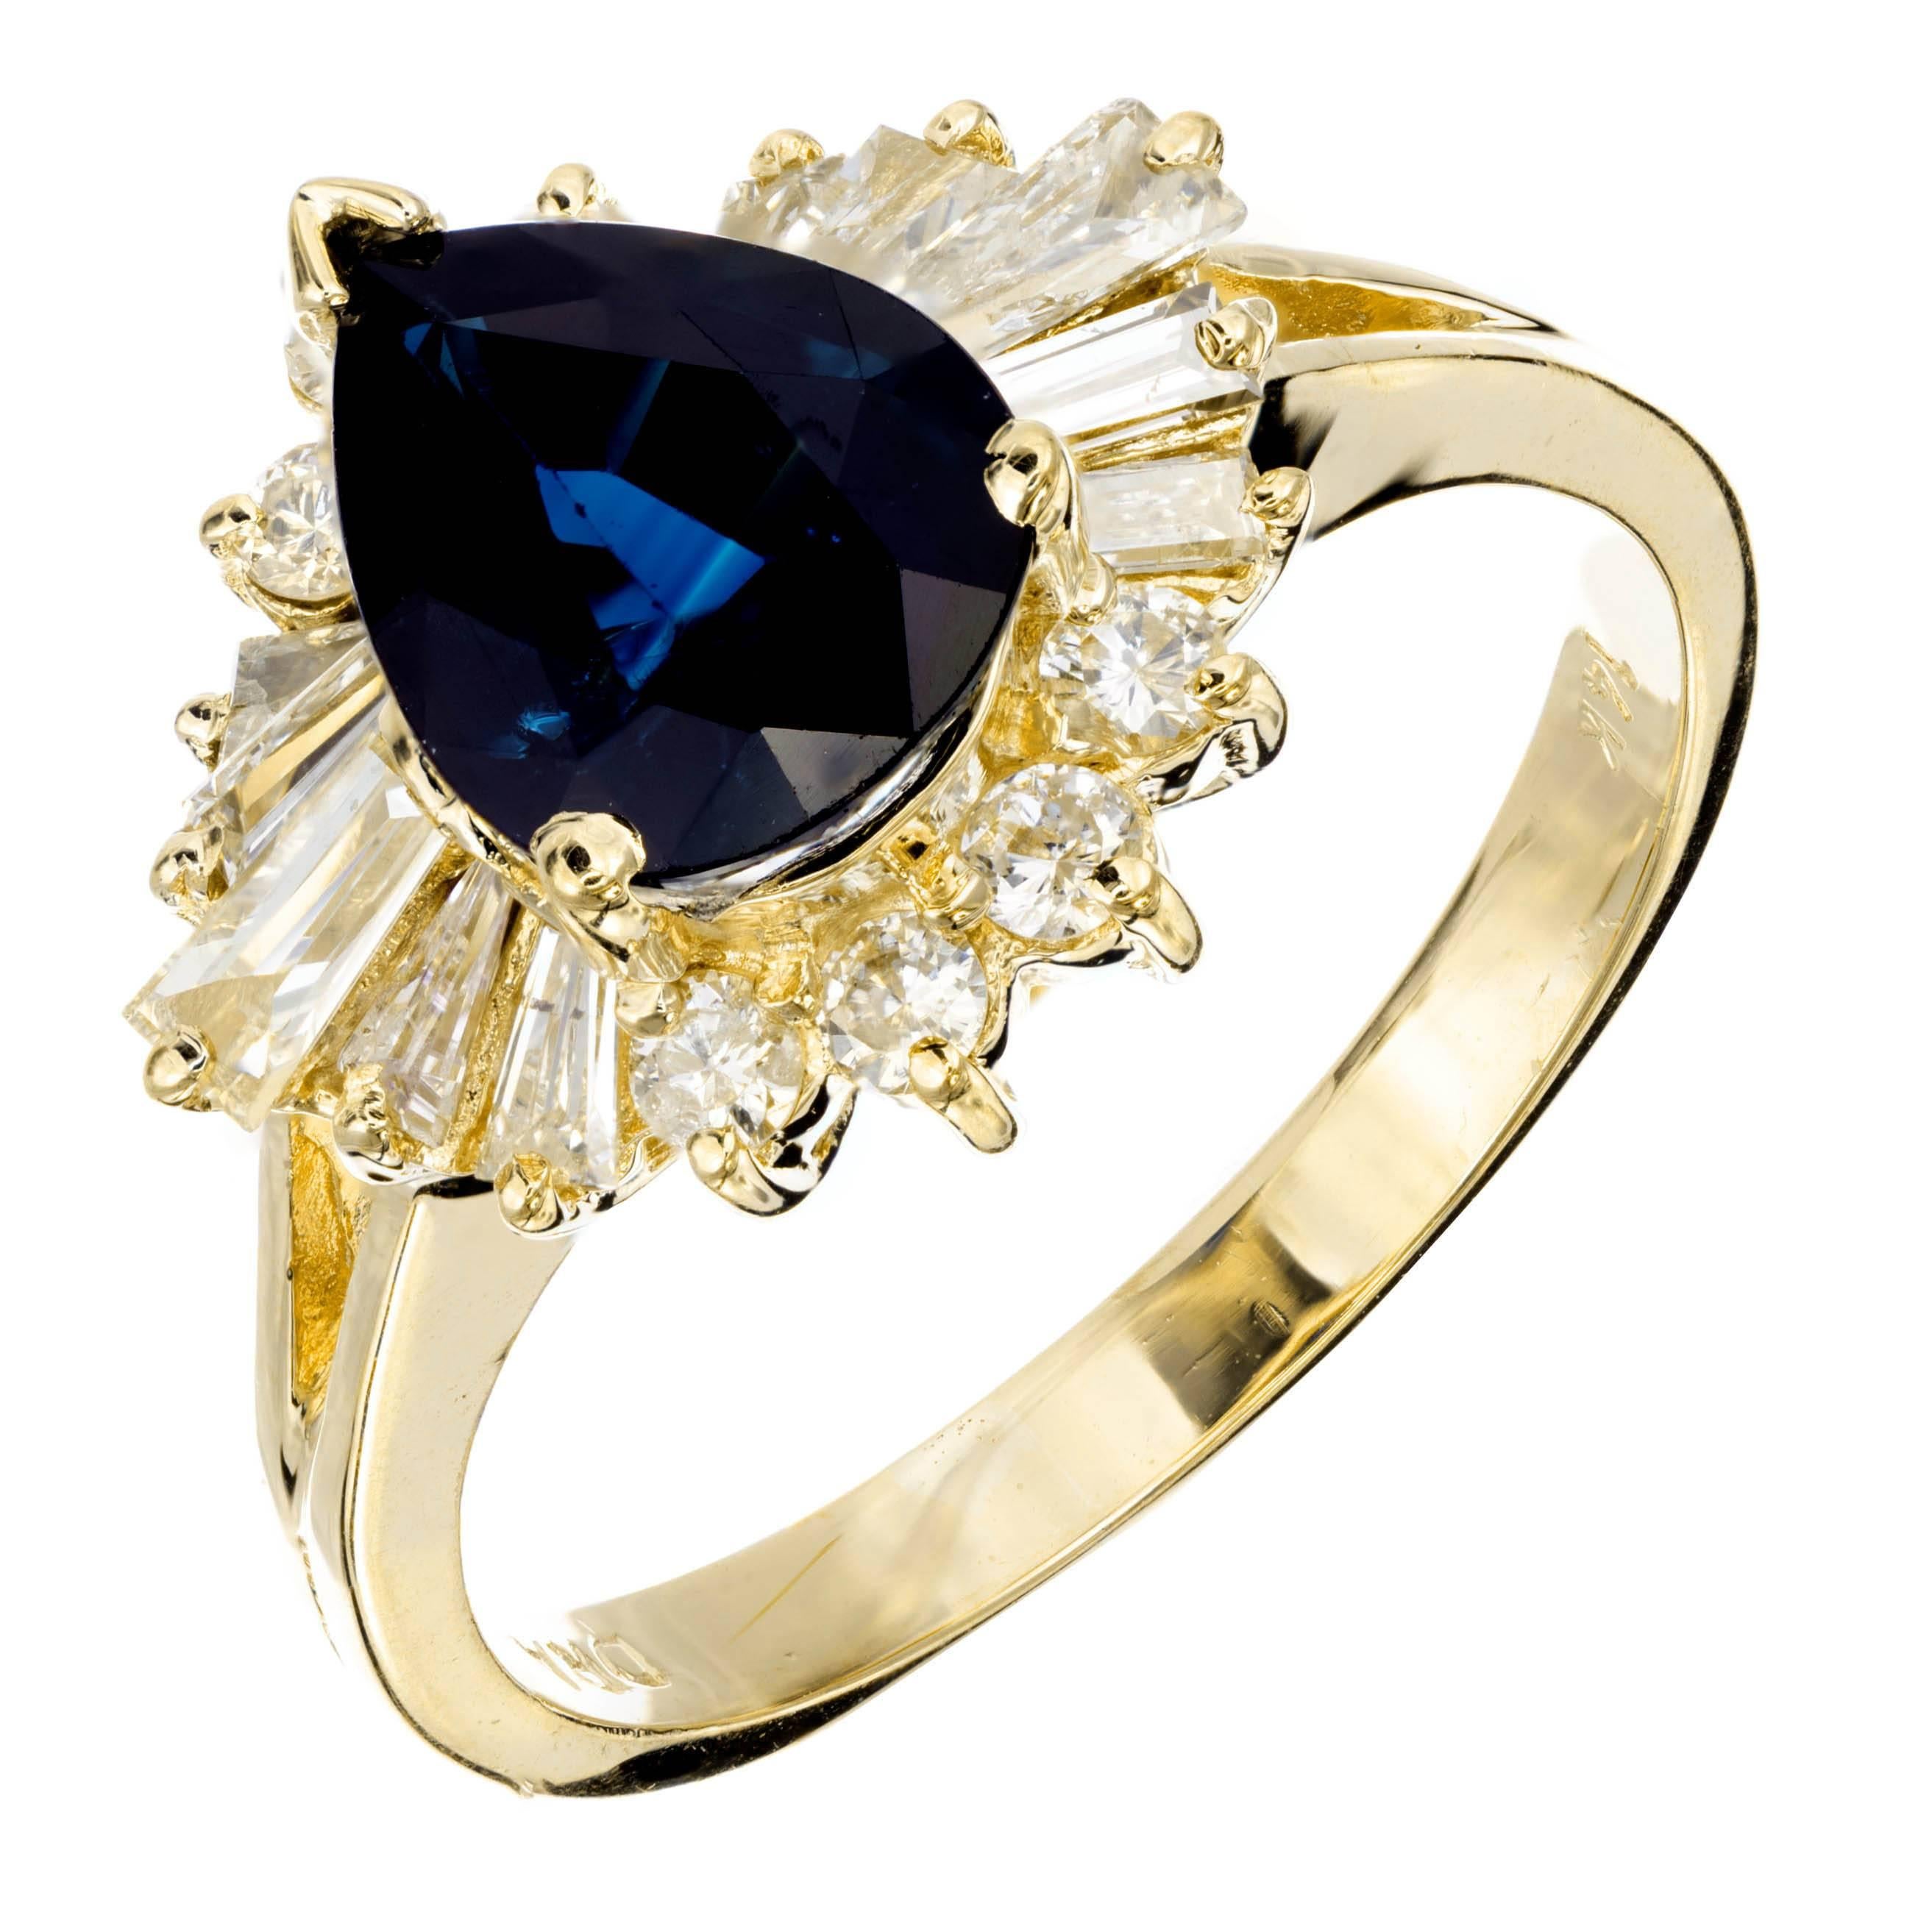 Princess style 1960’s pear shaped Sapphire and diamond engagement ring. Pear sapphire with round and baguette diamond halo. Deep blue color simple heat only. GIA Certified 

1 pear shaped dark blue Sapphire, approx. total weight 1.50cts, VS, 8.80 x